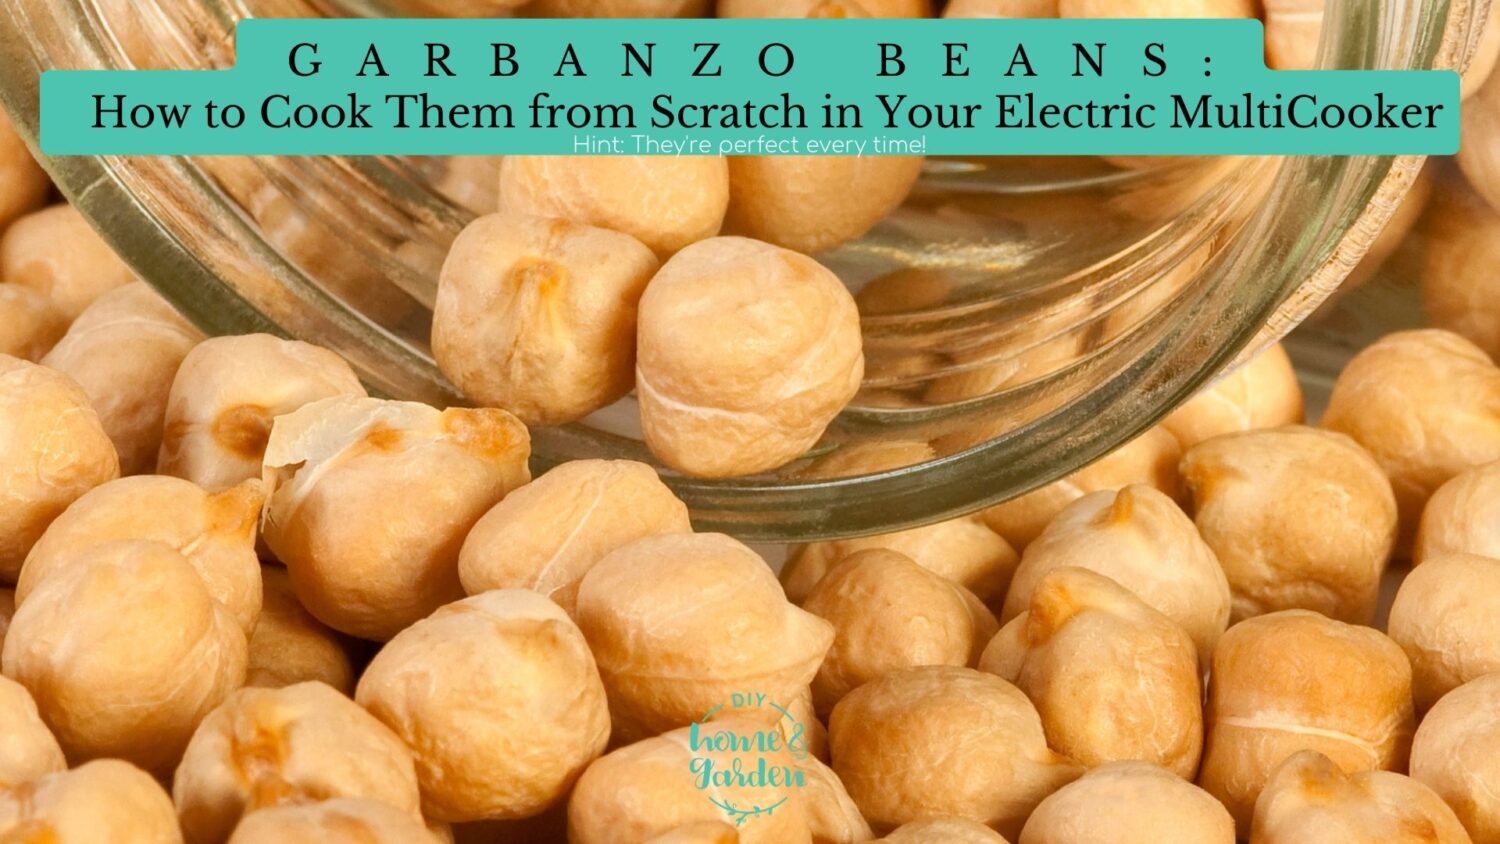 Garbanzo Beans: How to Cook Chickpeas From Scratch in a MultiCooker